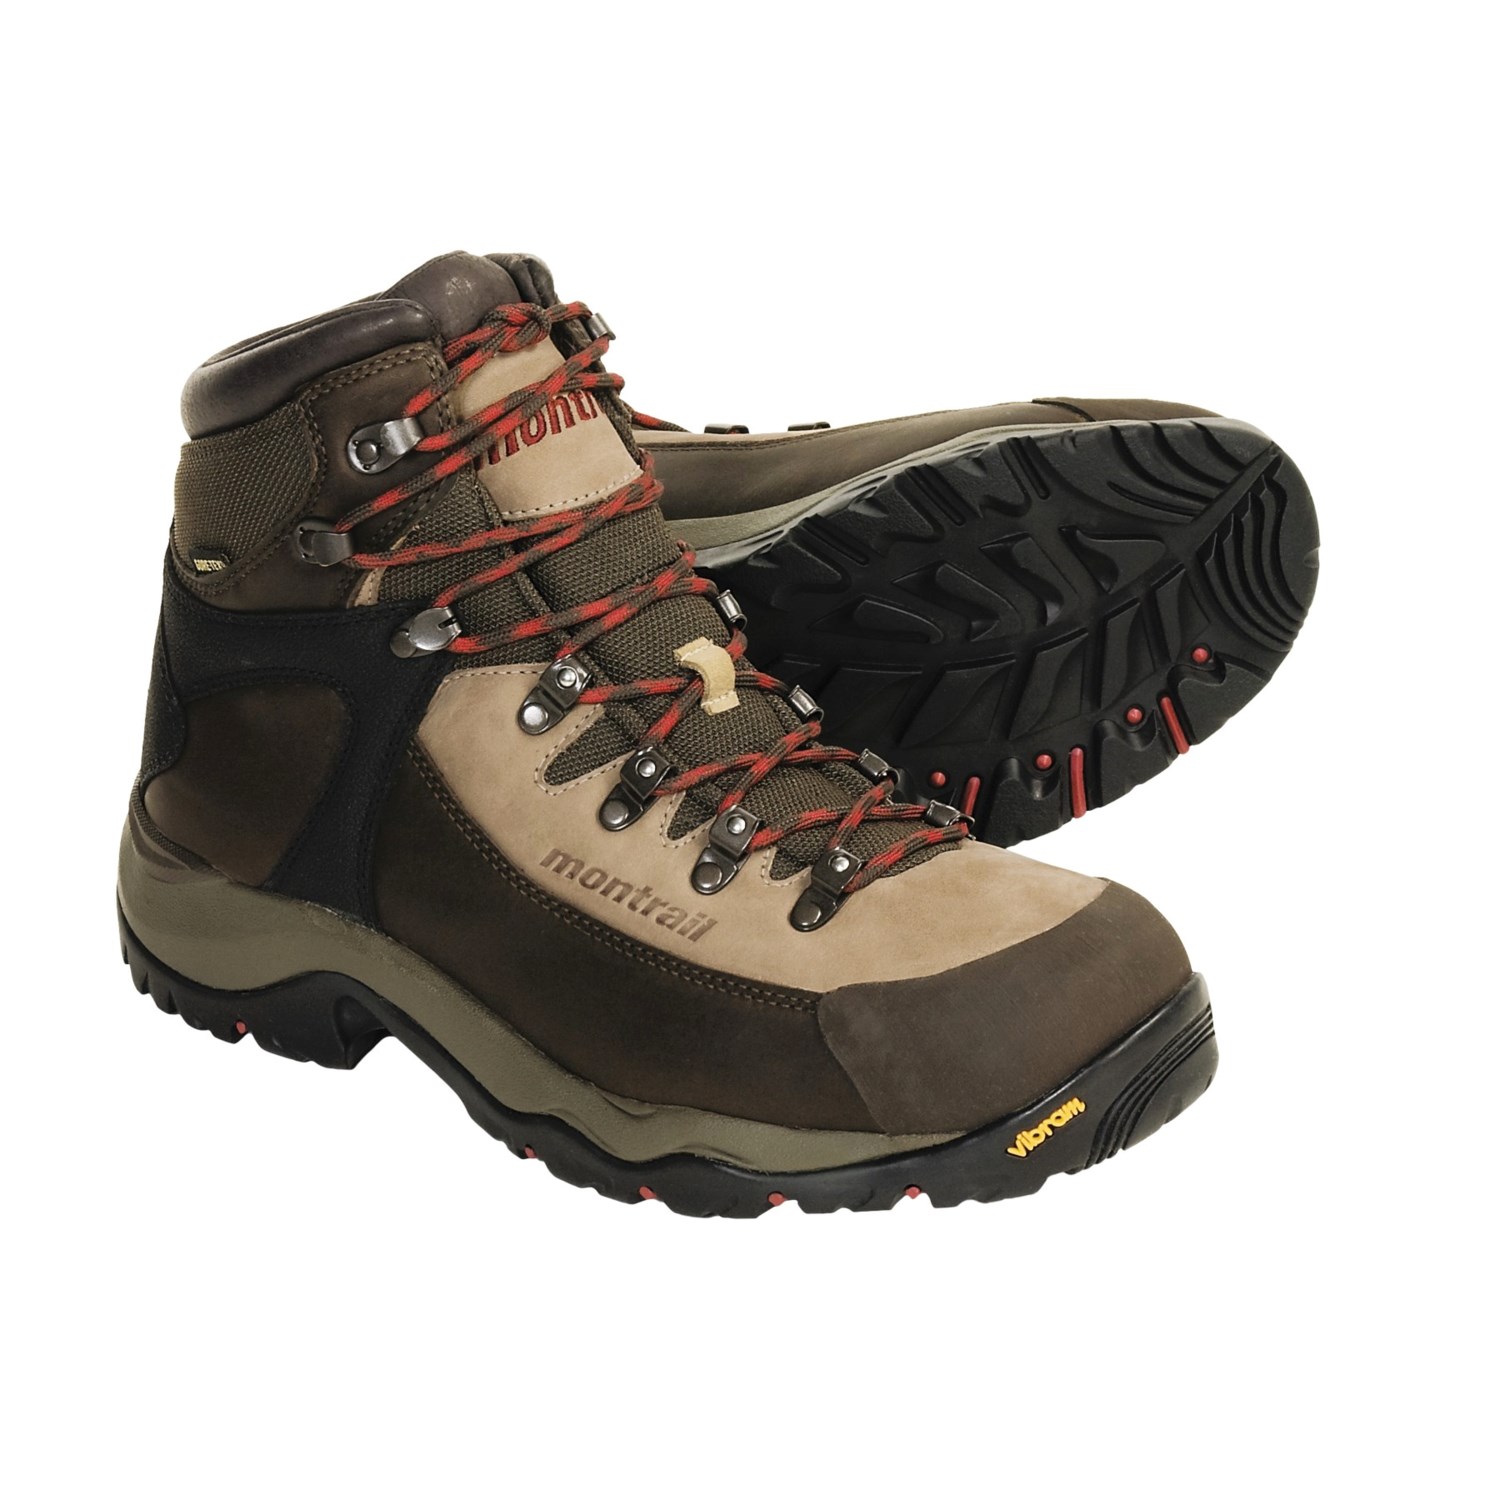 Montrail Feather Peak Gore-Tex® Hiking Boots (For Men) 3347J - Save 36%